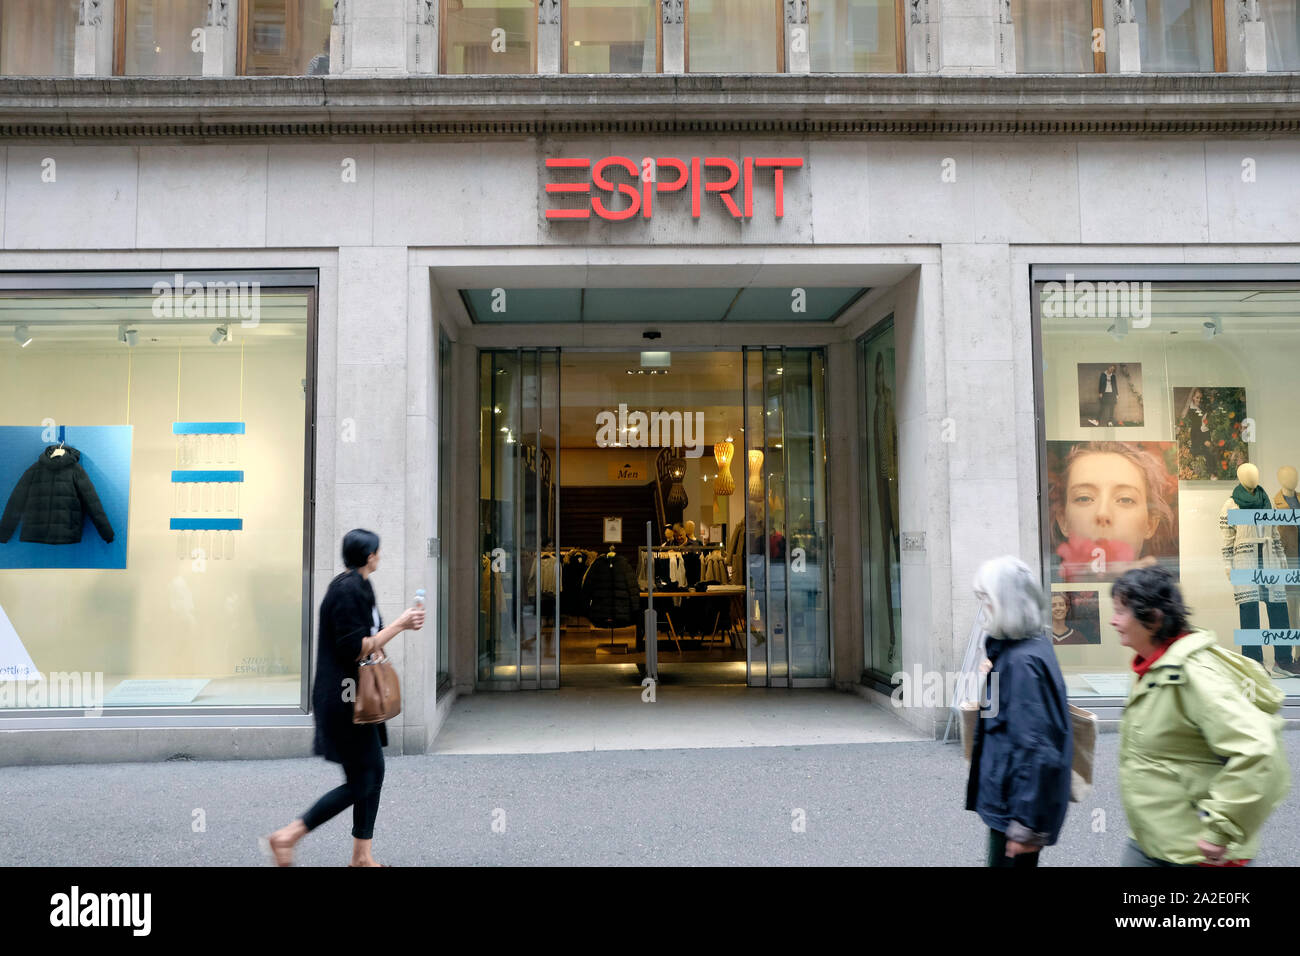 Esprit Fashion High Resolution Stock Photography and Images - Alamy